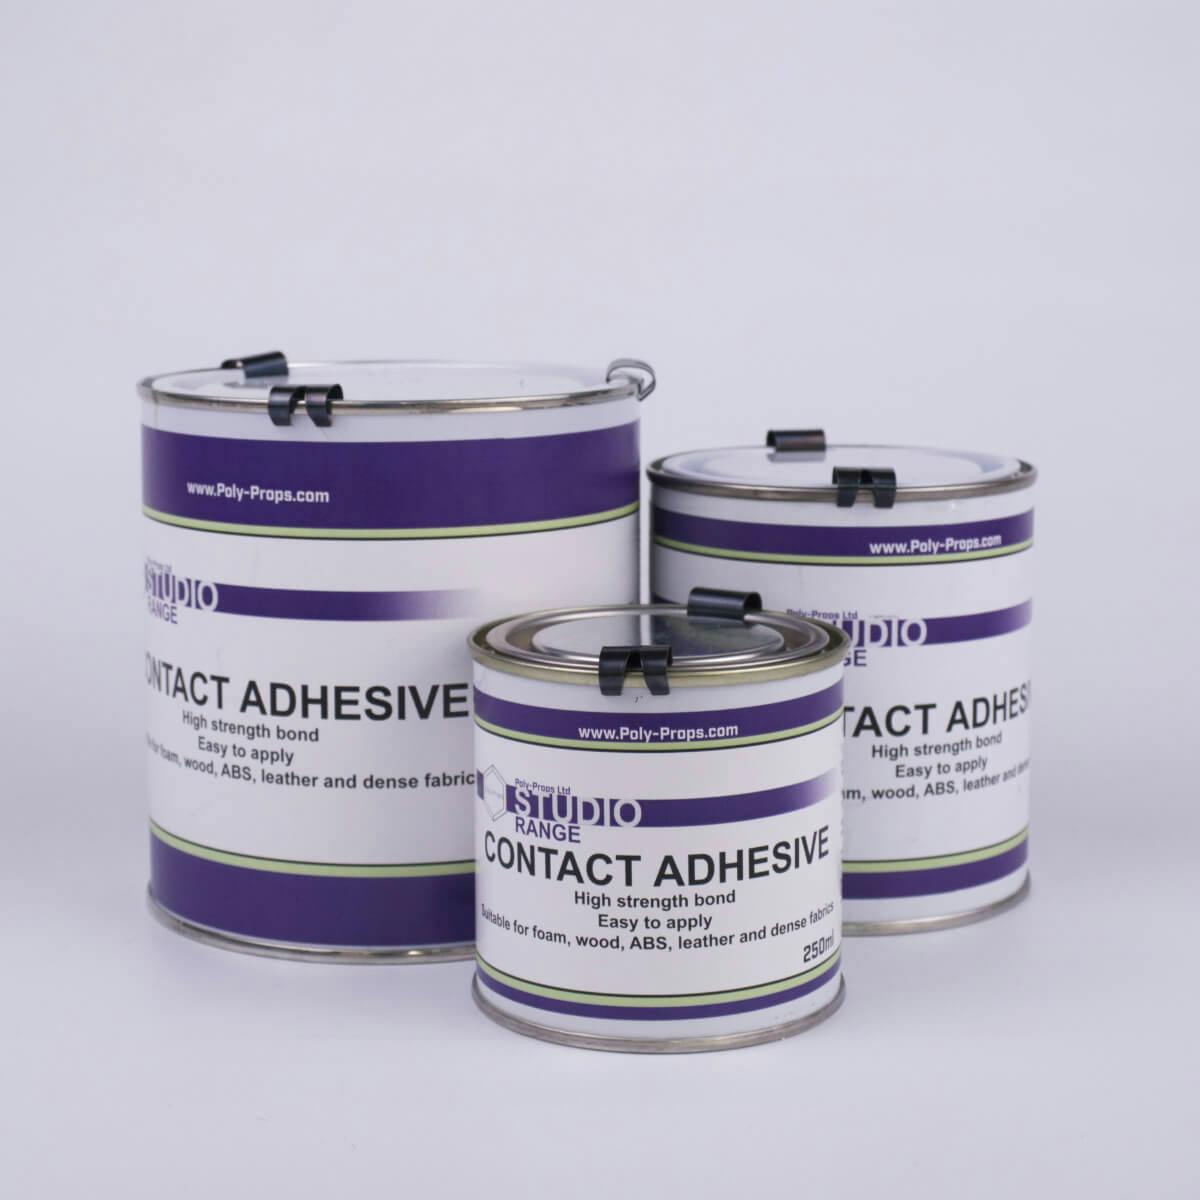 Different sizes of containers with contact adhesive on white background